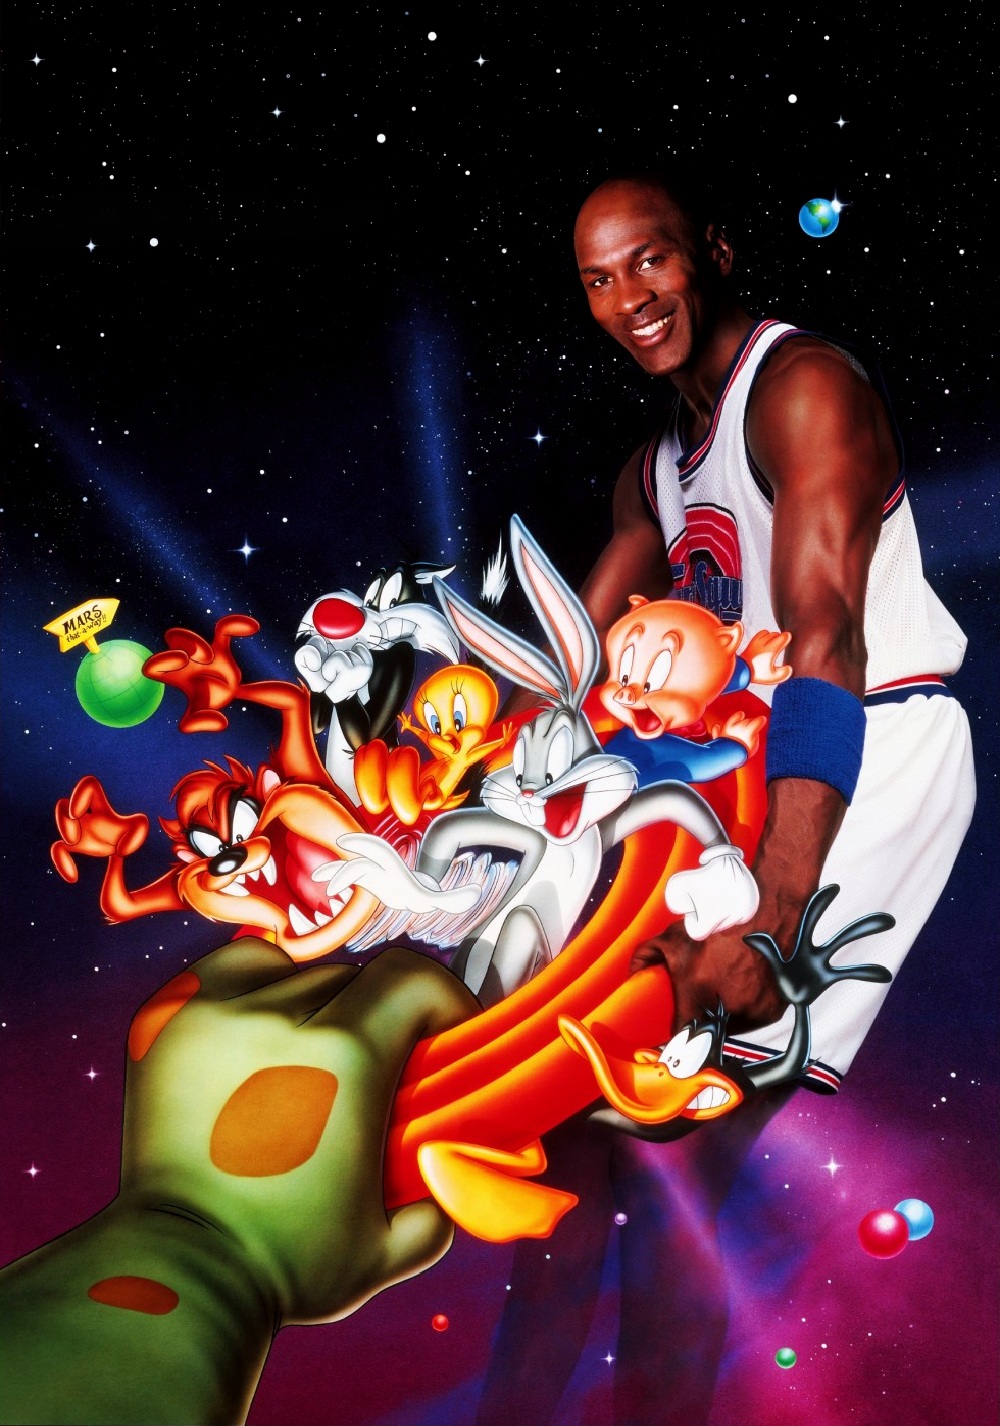 Space Jam Images. 